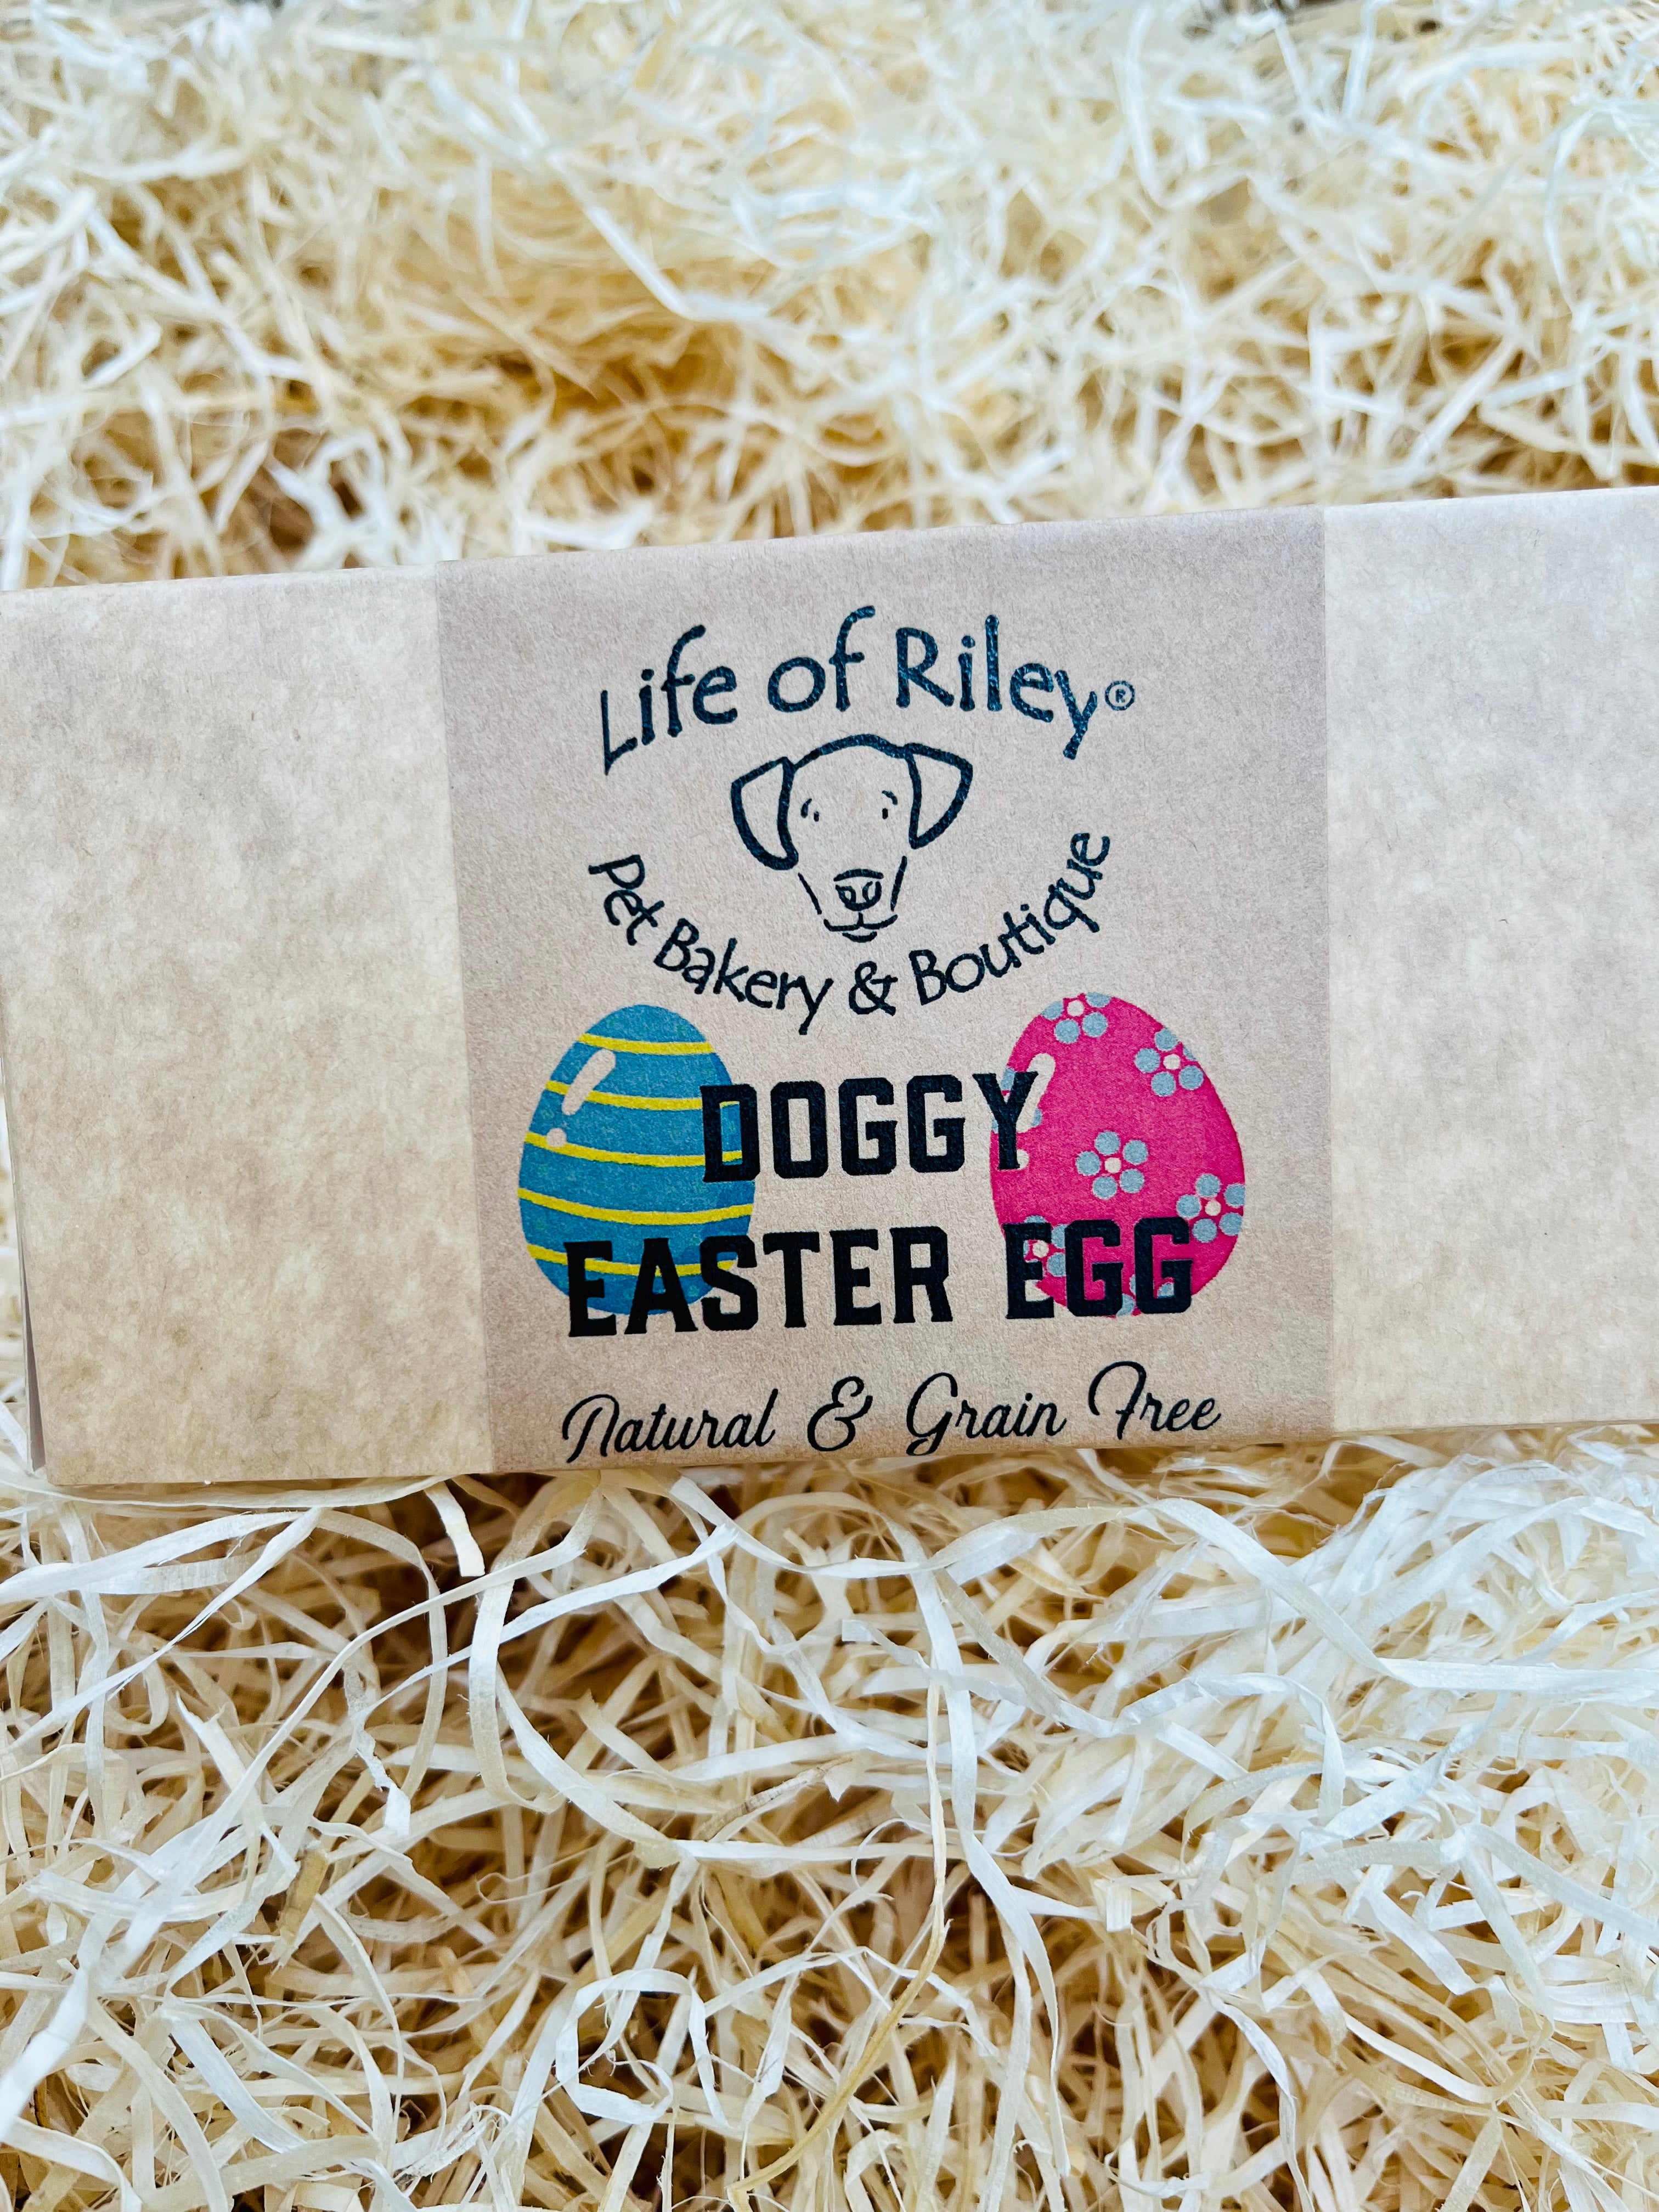 Doggy Easter Egg - Grain Free Natural Dog Treat